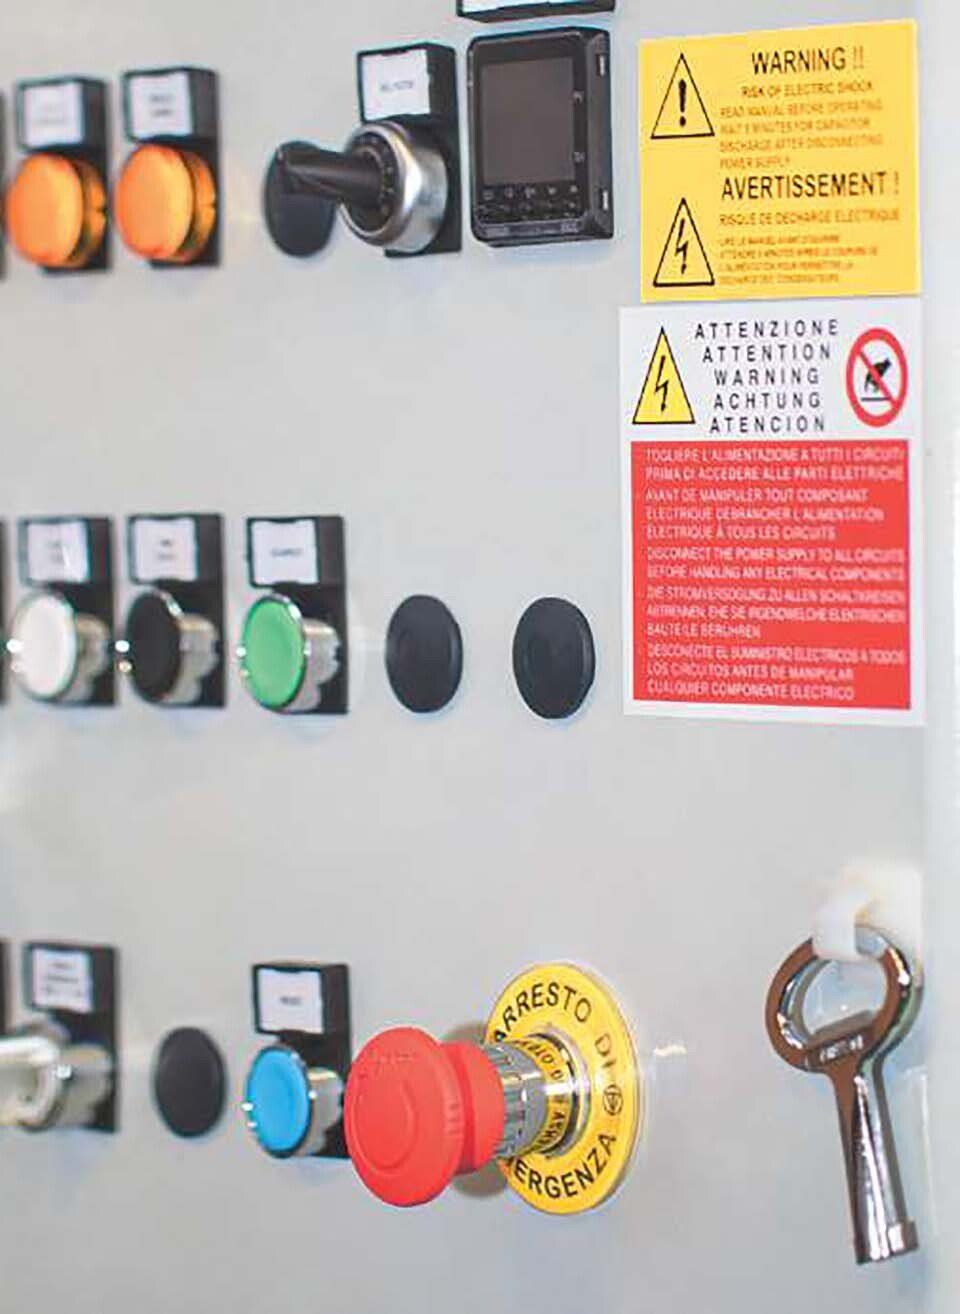 control panel of an installation with coloured buttons